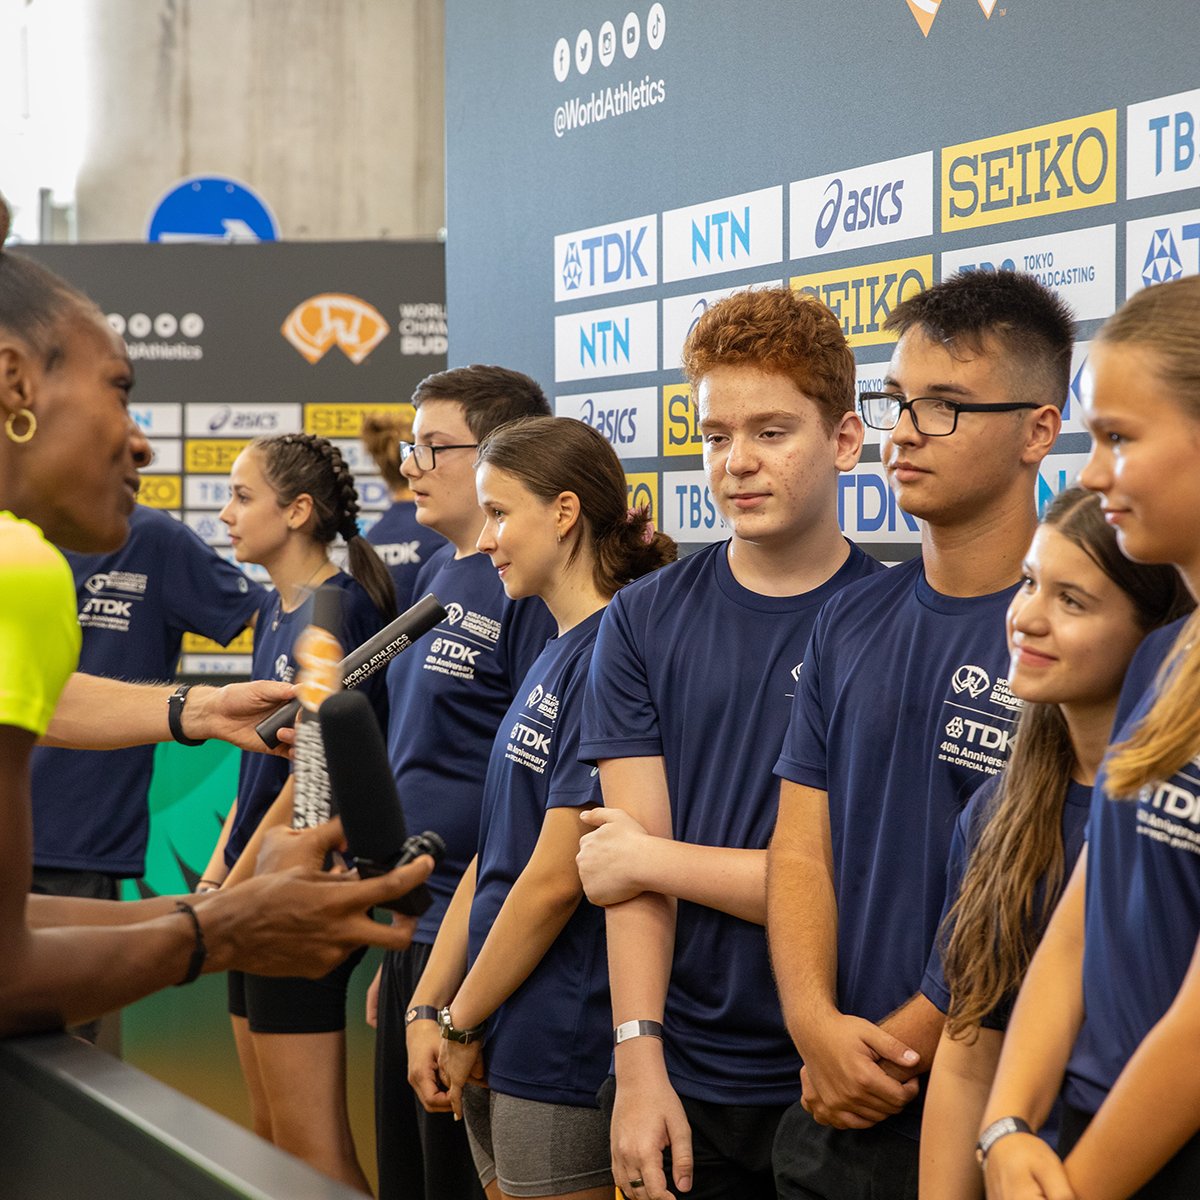 📆 Today, as Japan celebrates Sport and Health Day, we at TDK are proud to play our part in promoting physical wellness and athletic excellence globally. Here are a few captivating moments from the Rising Stars Clinic at #wabudapest23 🙌

@WorldAthletics #Worldathleticschamps